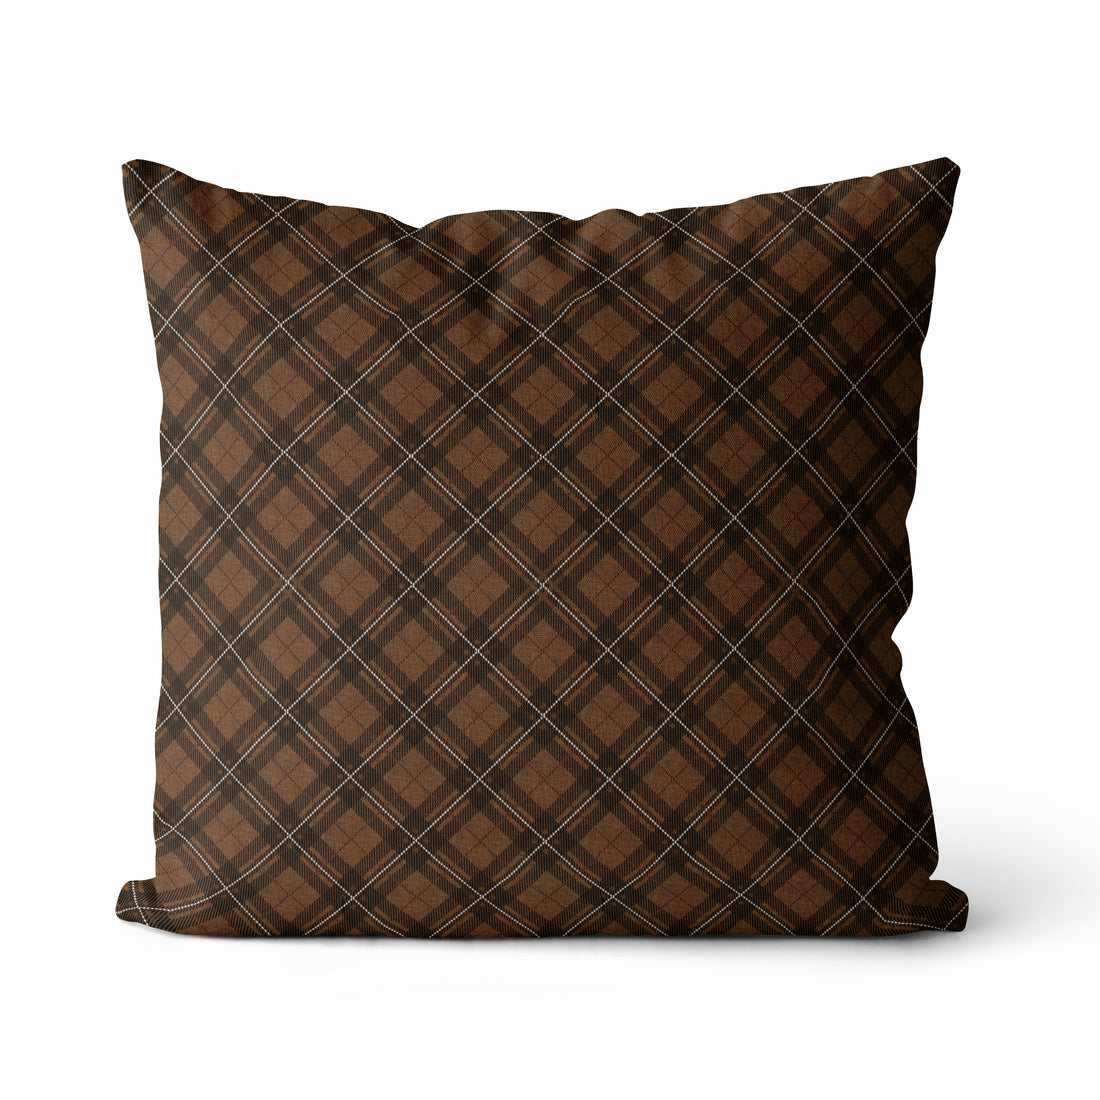 Dylan Throw Pillow Cover